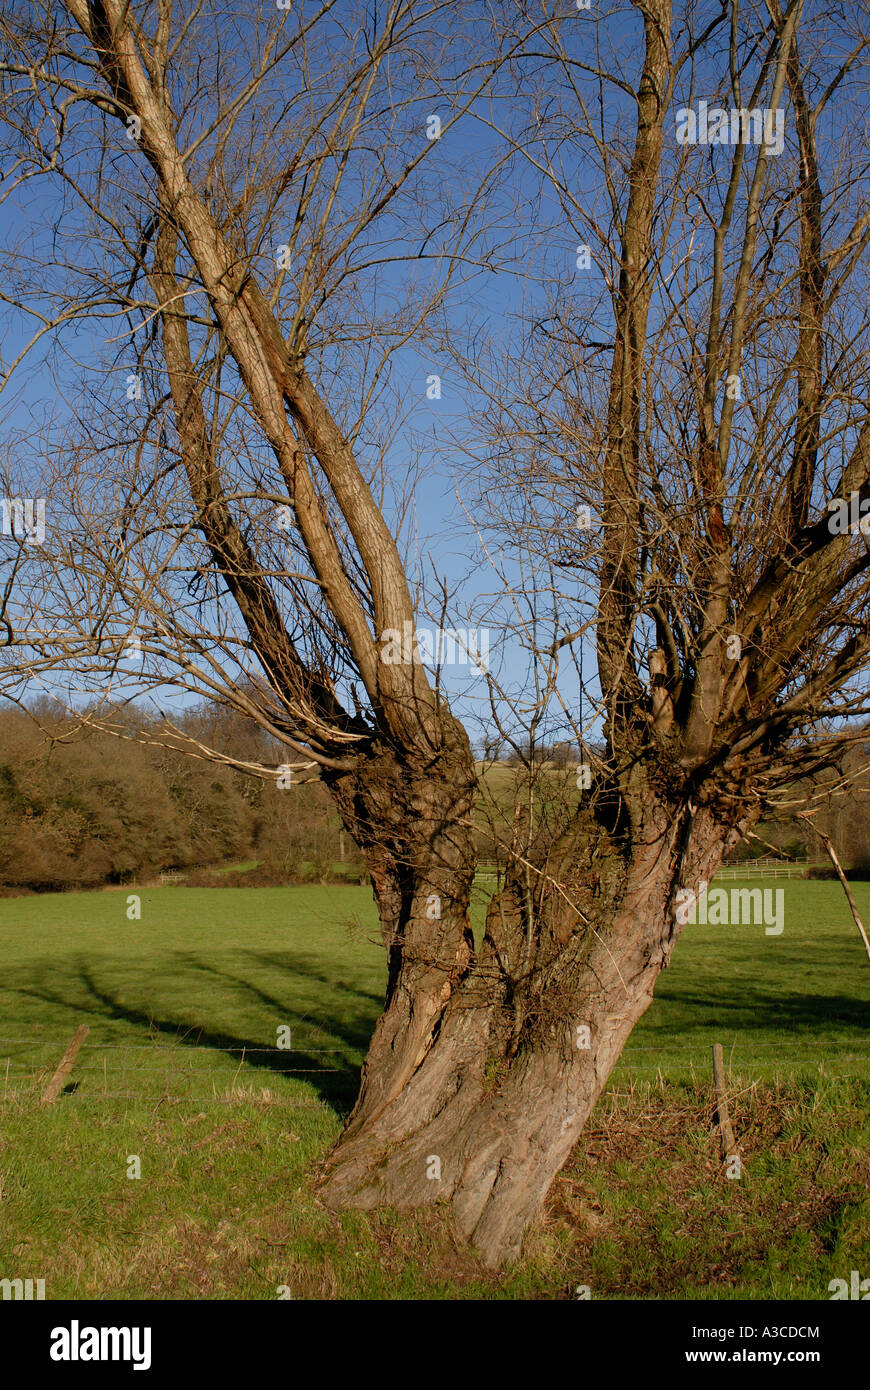 An old coppiced willow Salix species tree against a clear blue sky Speldhurst Kent England UK 01 January 2007 Stock Photo